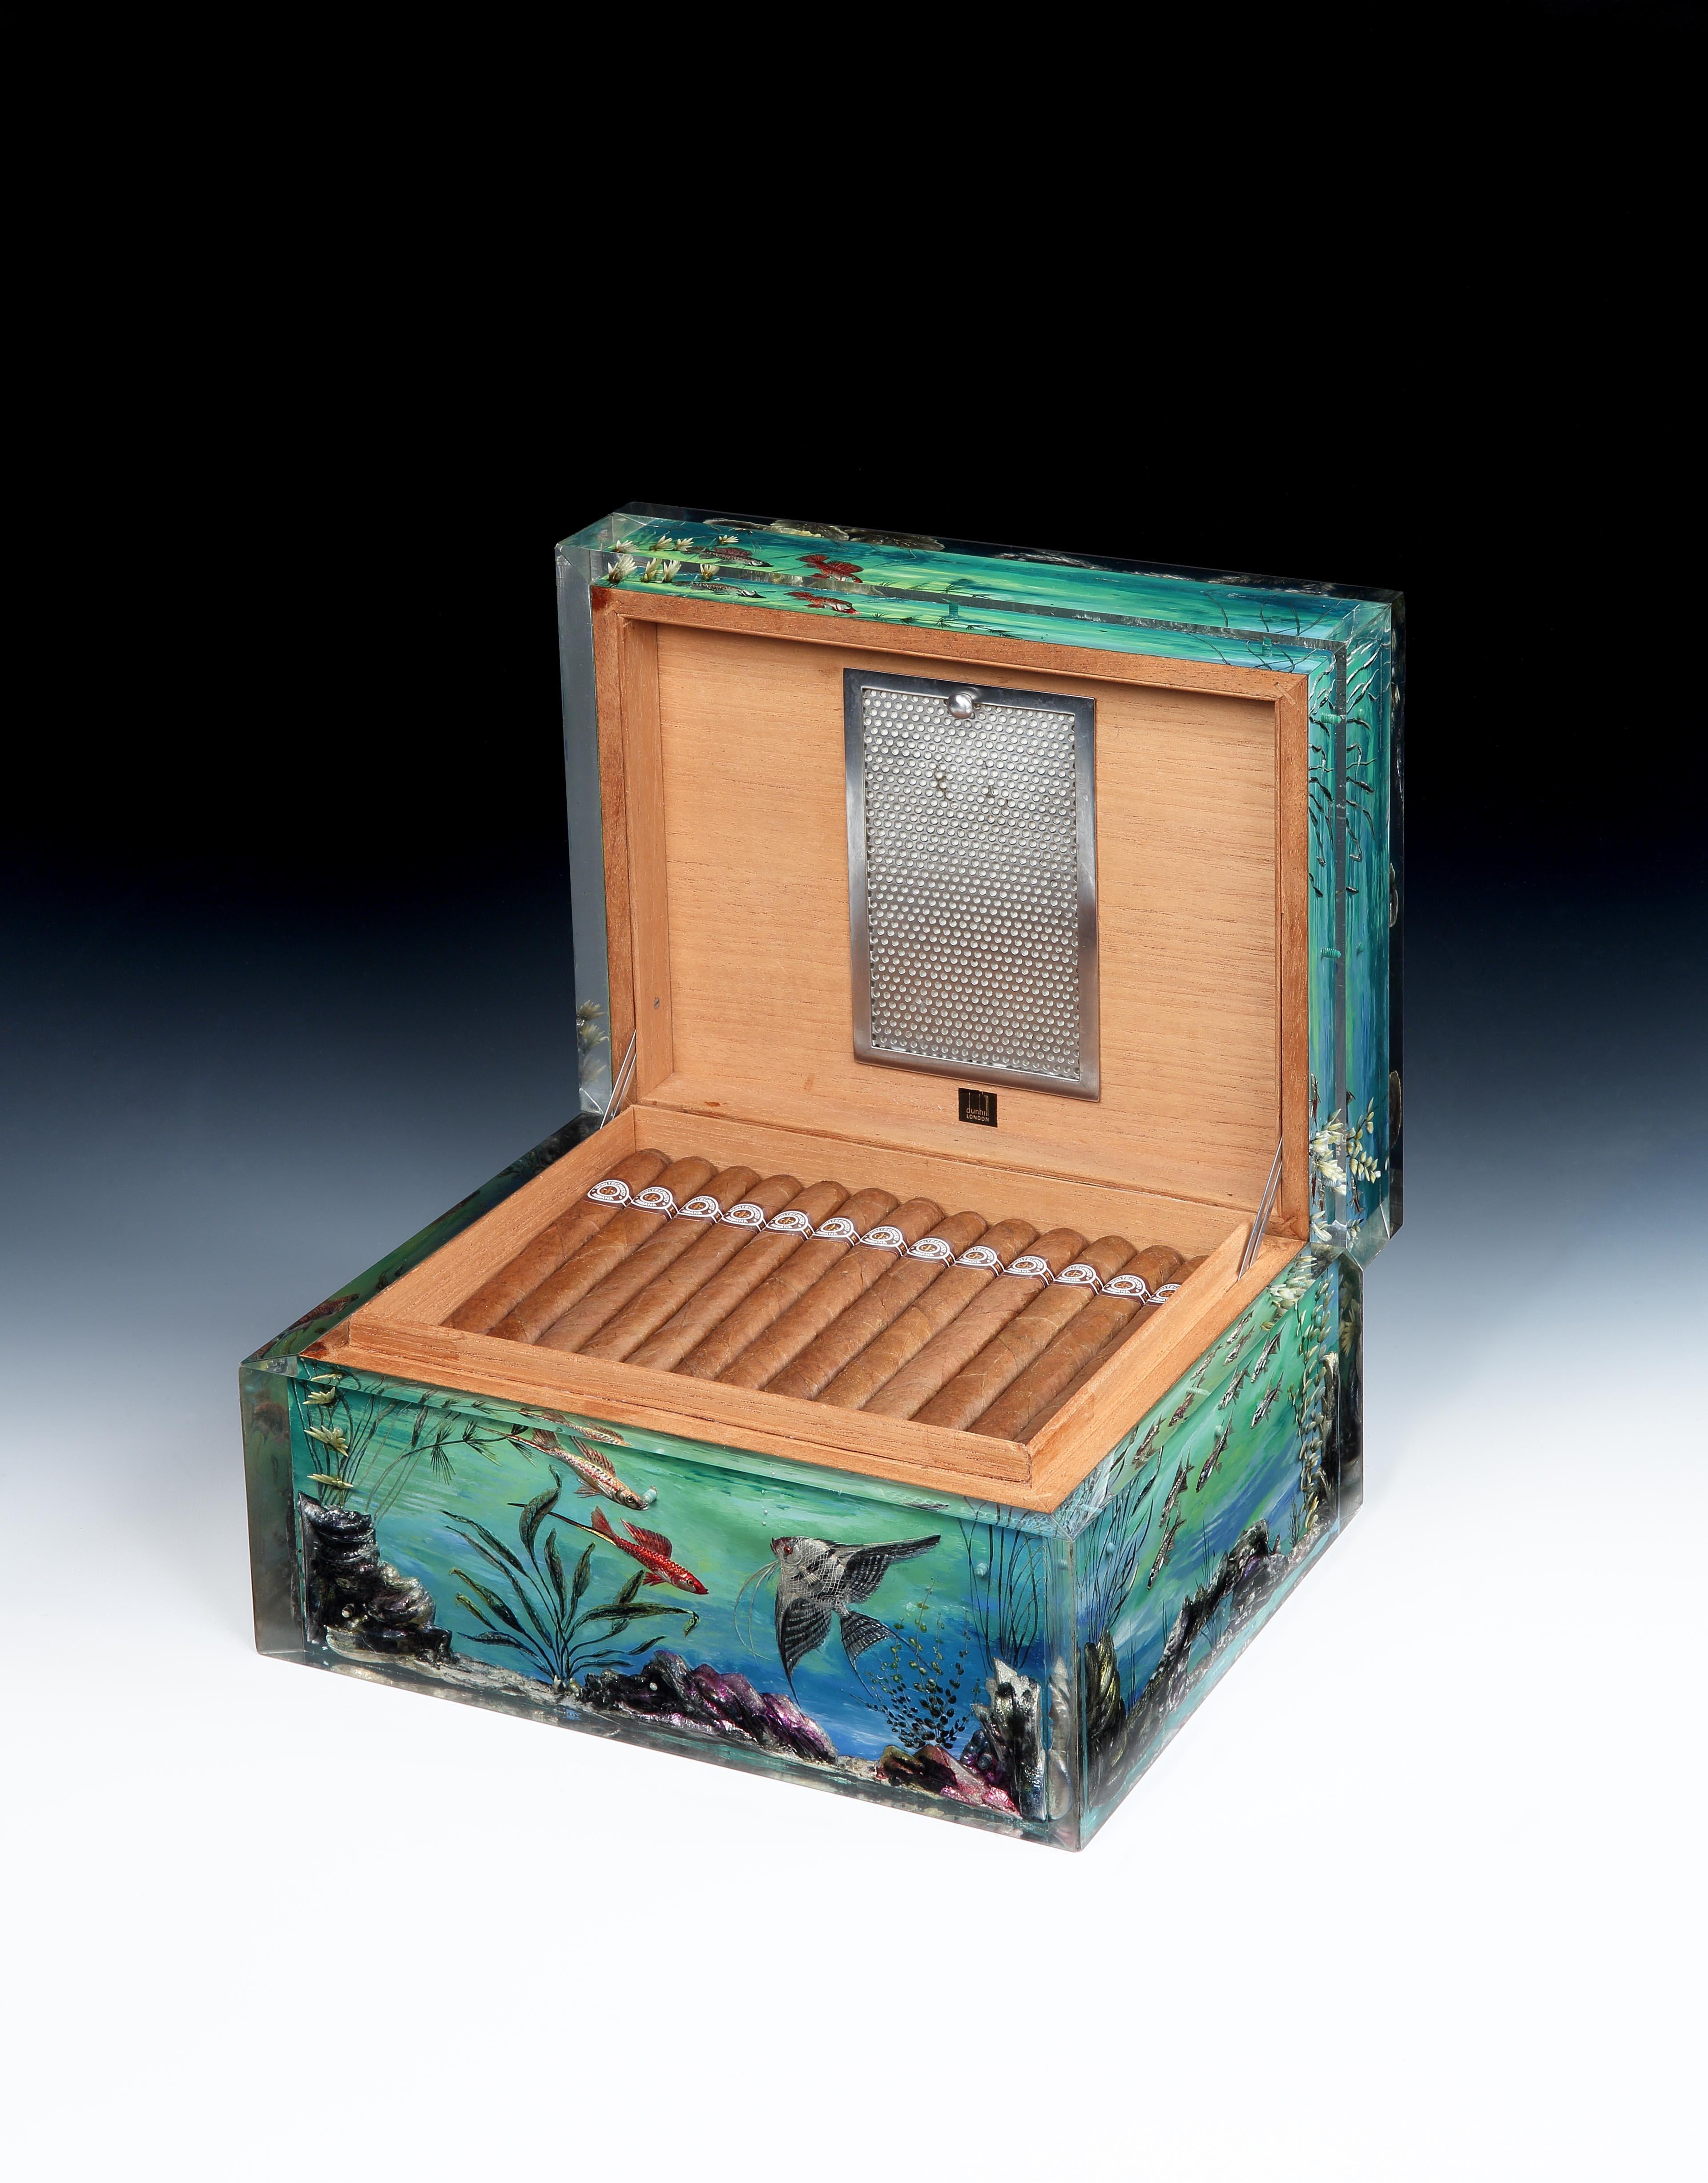 Alfred Dunhill, London

Of extraordinary quality, this beautifully hand-painted 'Aquarium' humidor was a special order collaboration for Dunhill, between Ben Shillingford and watercolour artist Margaret Bennett and features beautifully painted